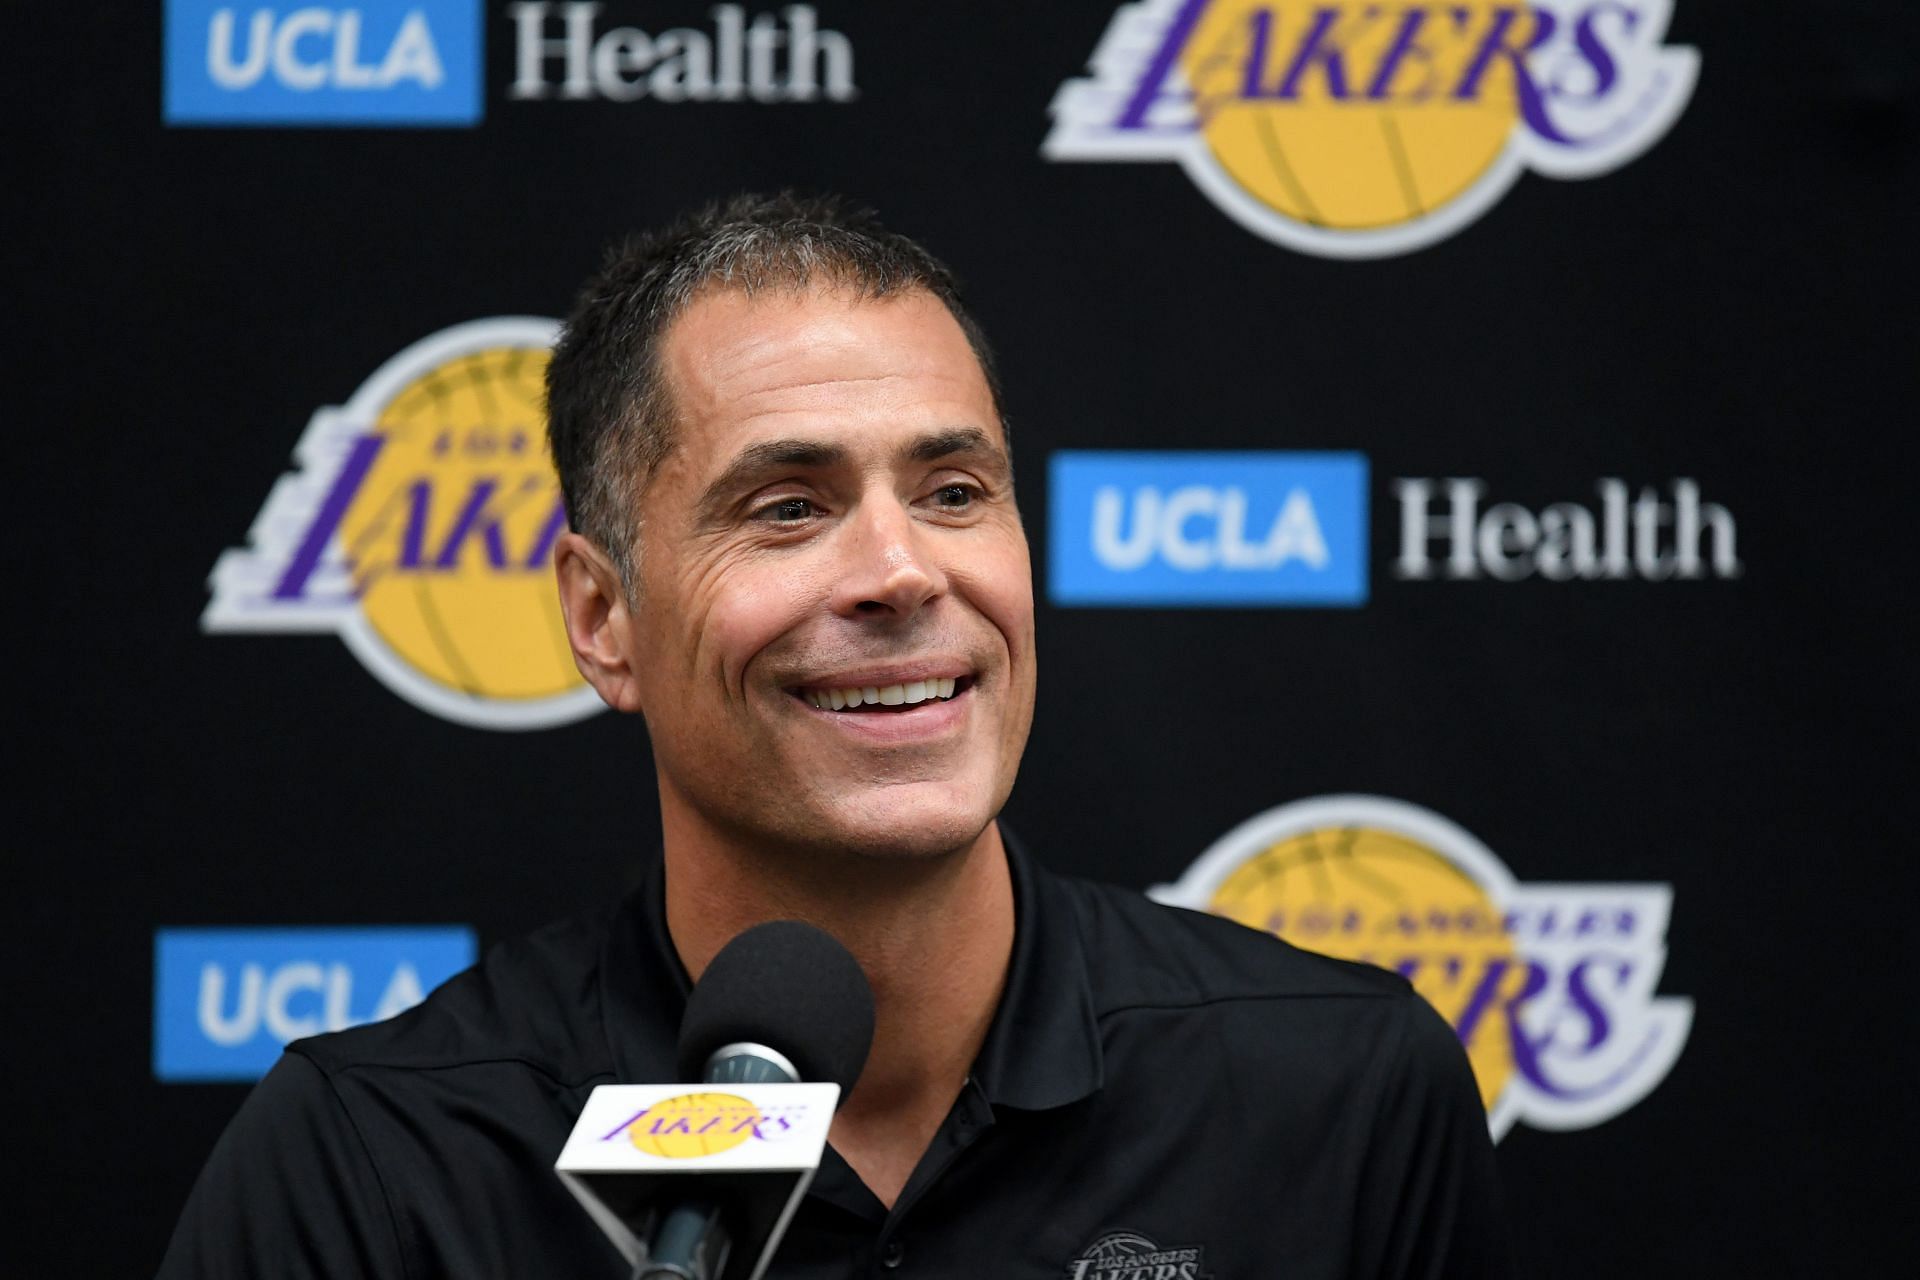 LA Lakers general manager Rob Pelinka smiles as he speaks to the press during media day at the UCLA Health Training Center on Sept. 27, 2019, in El Segundo, California